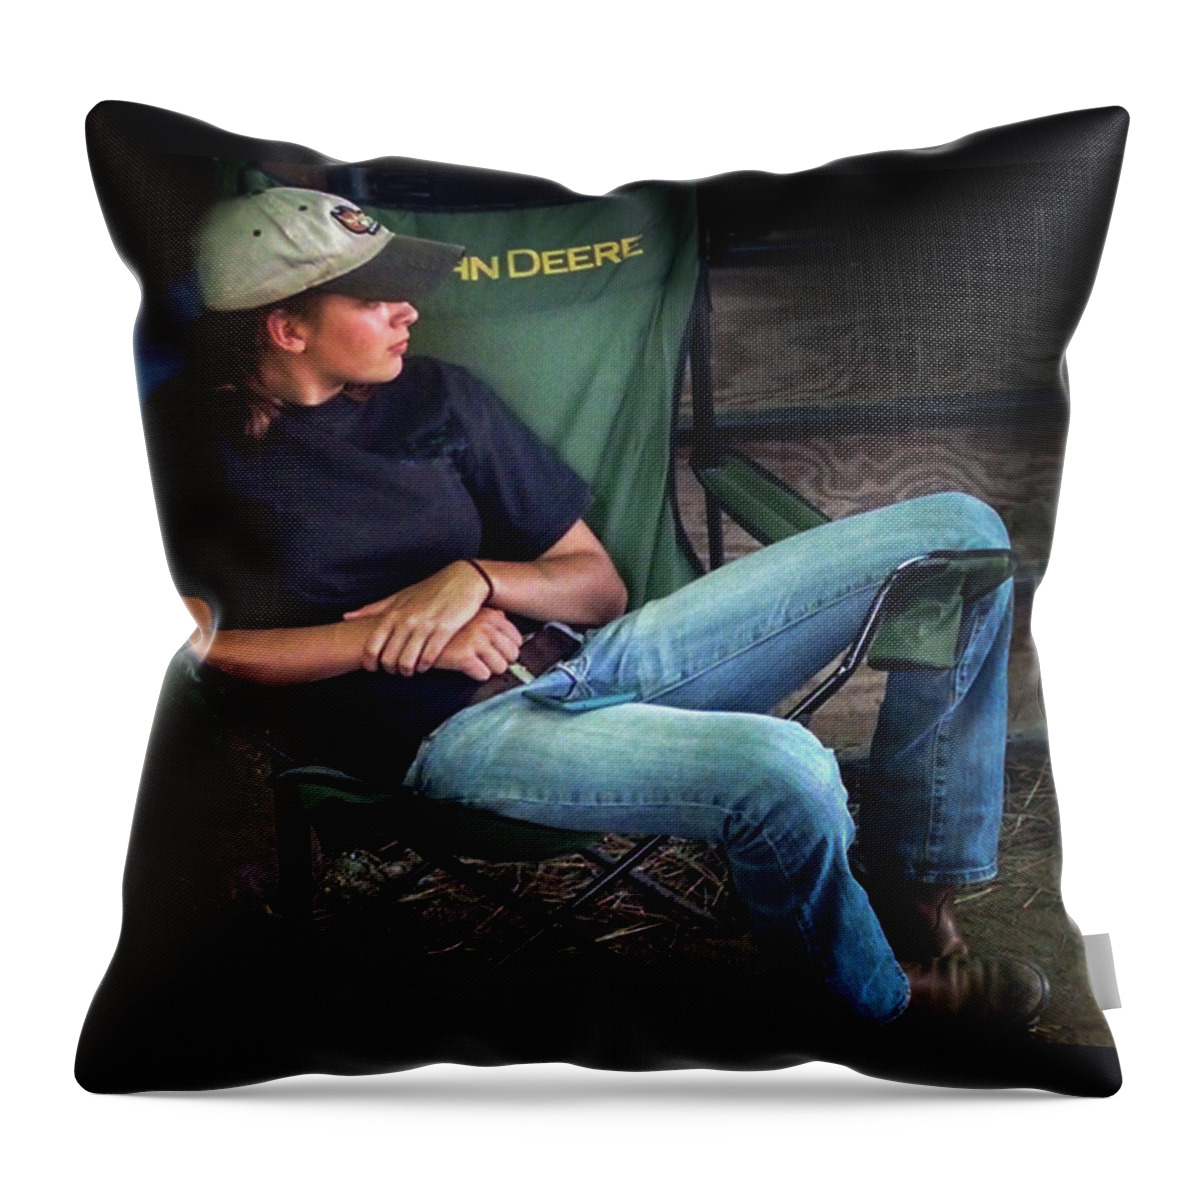 2017 Throw Pillow featuring the photograph Girl at the Fair in the John Deere Chair by George Harth